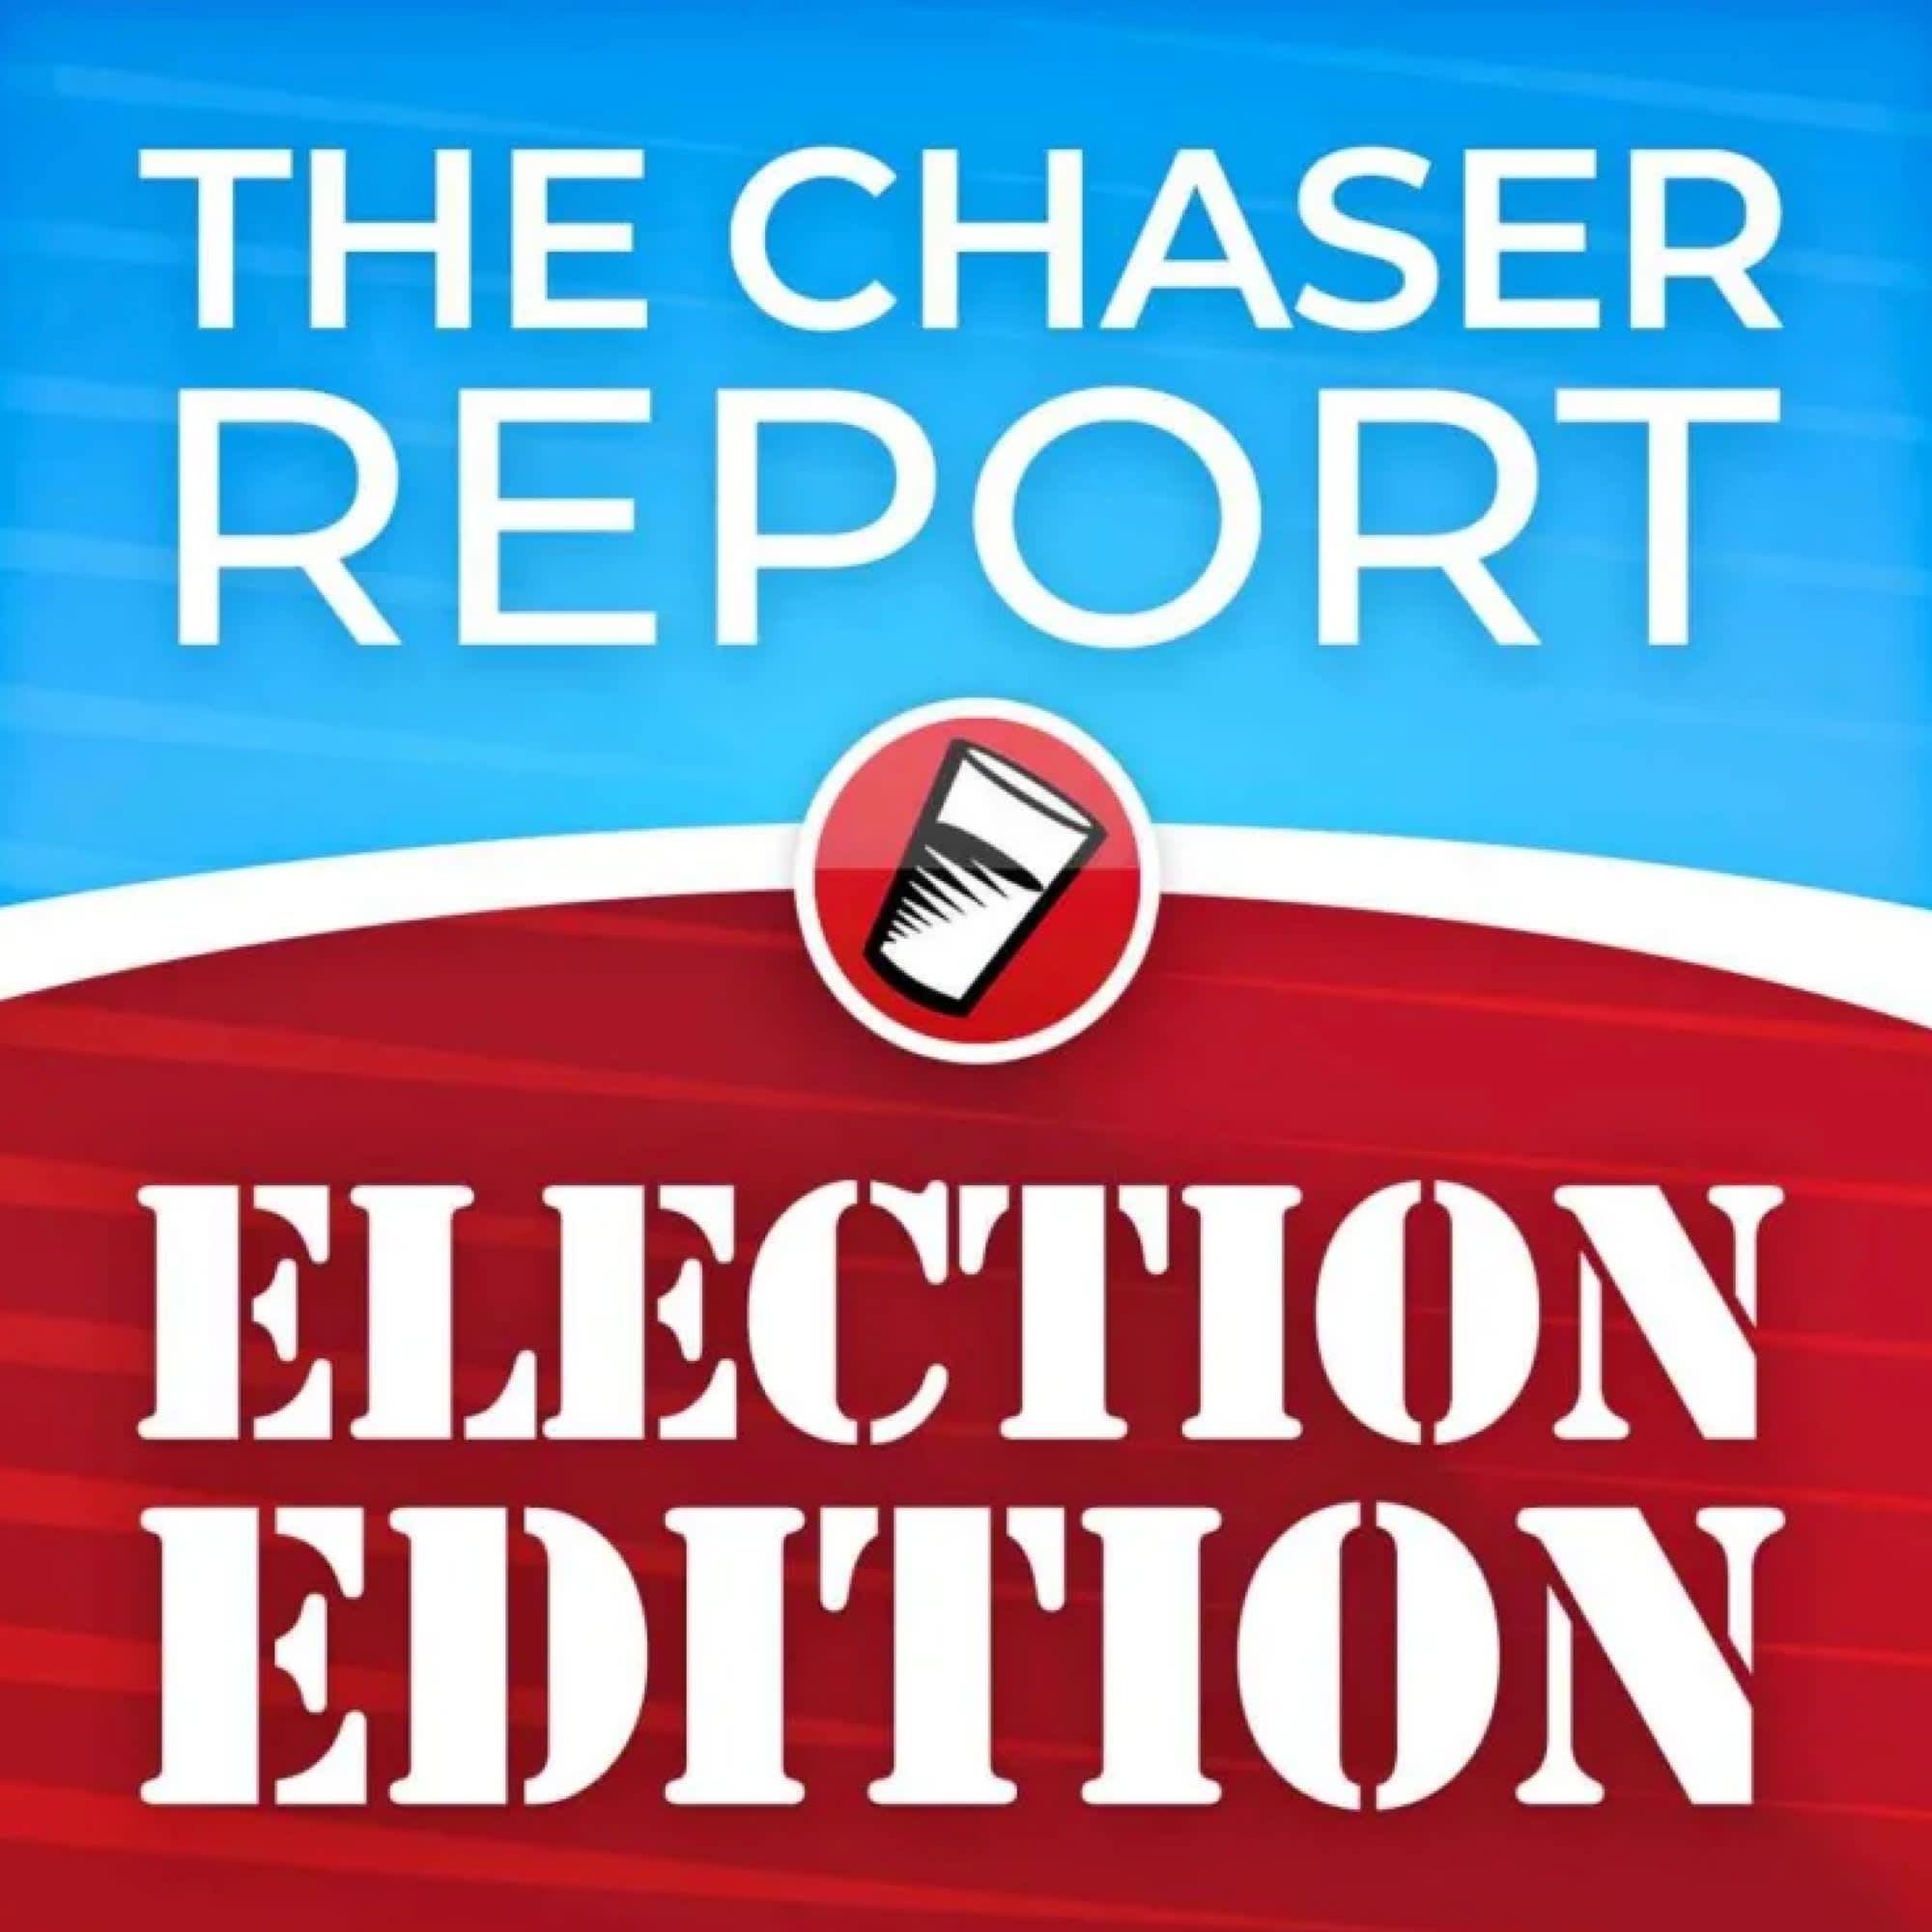 the chaser report election edition podcast taurus acast network